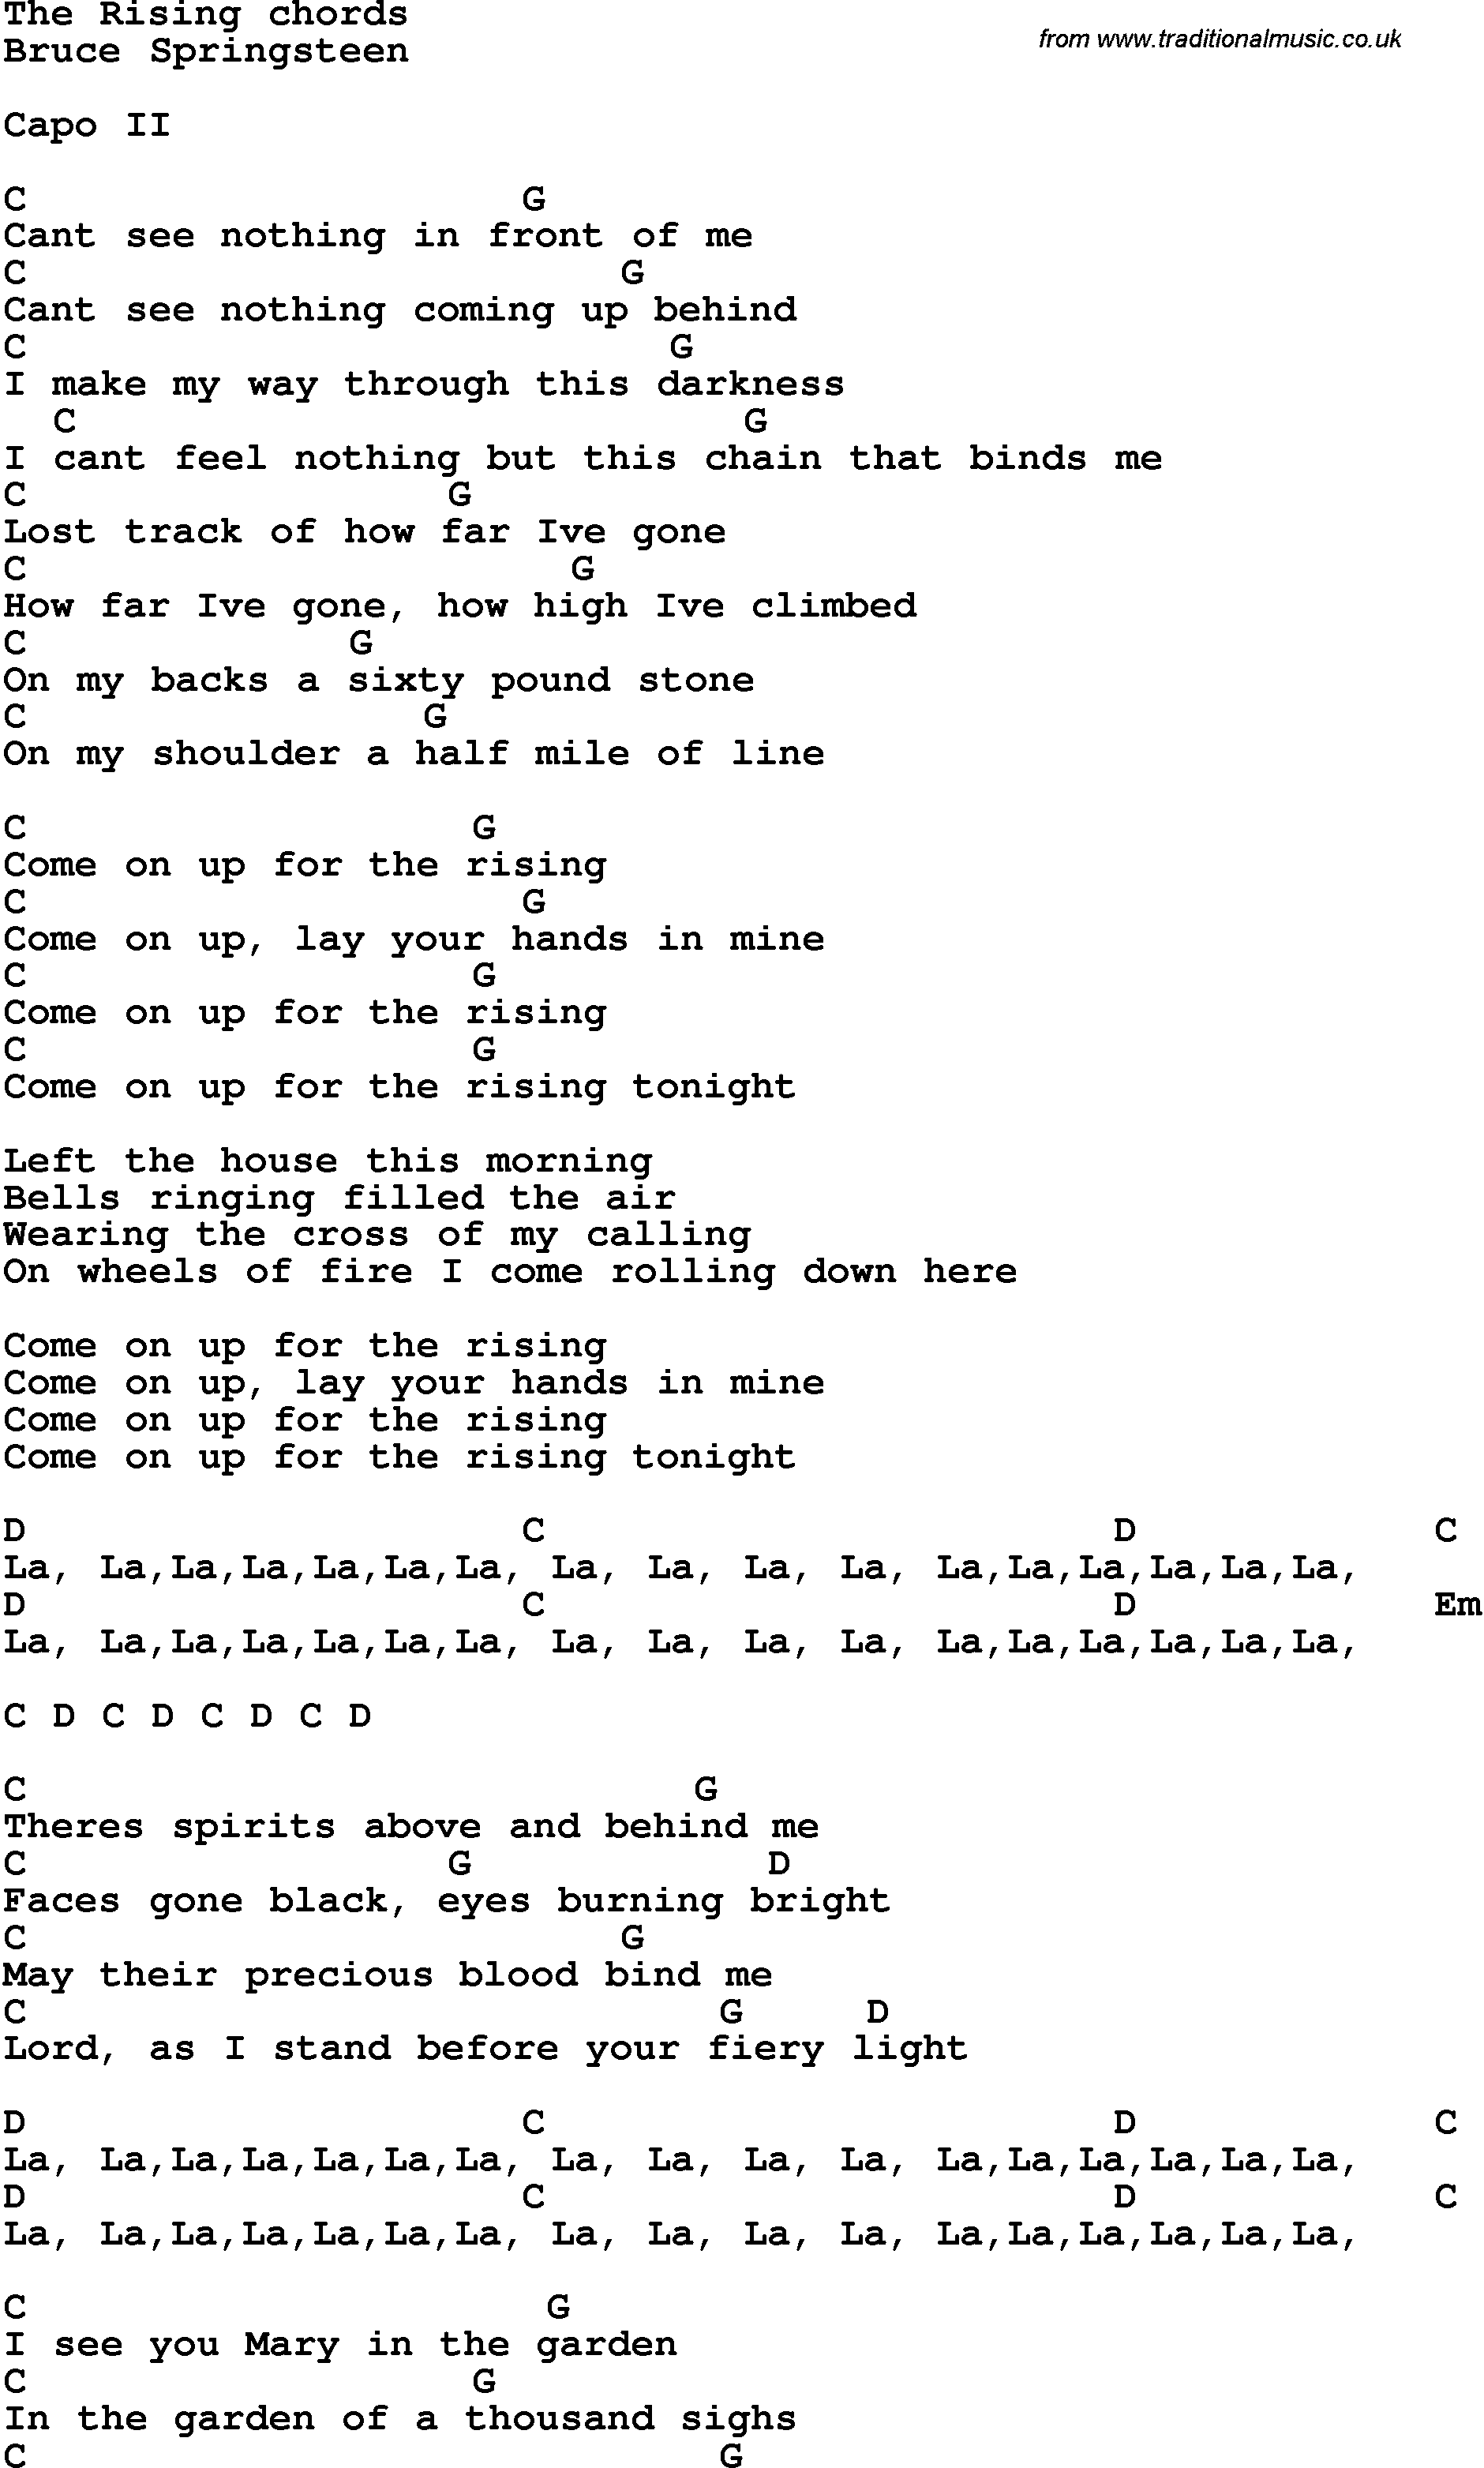 Song Lyrics with guitar chords for The Rising - Bruce Springsteen